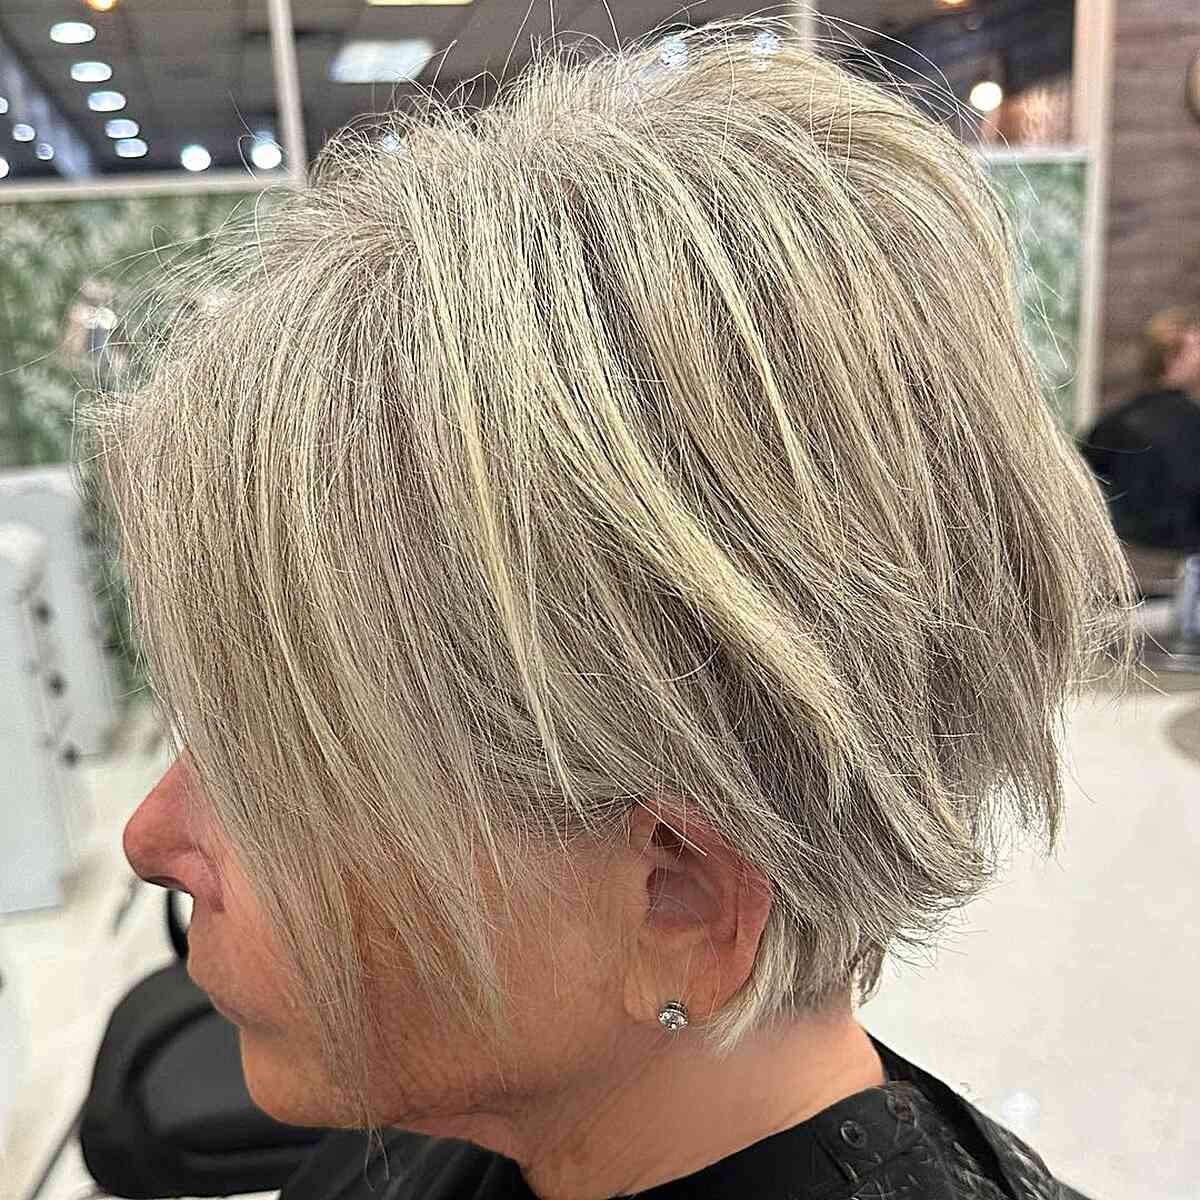 Long Messy Pixie Bob with Graduation on older women past their 50s